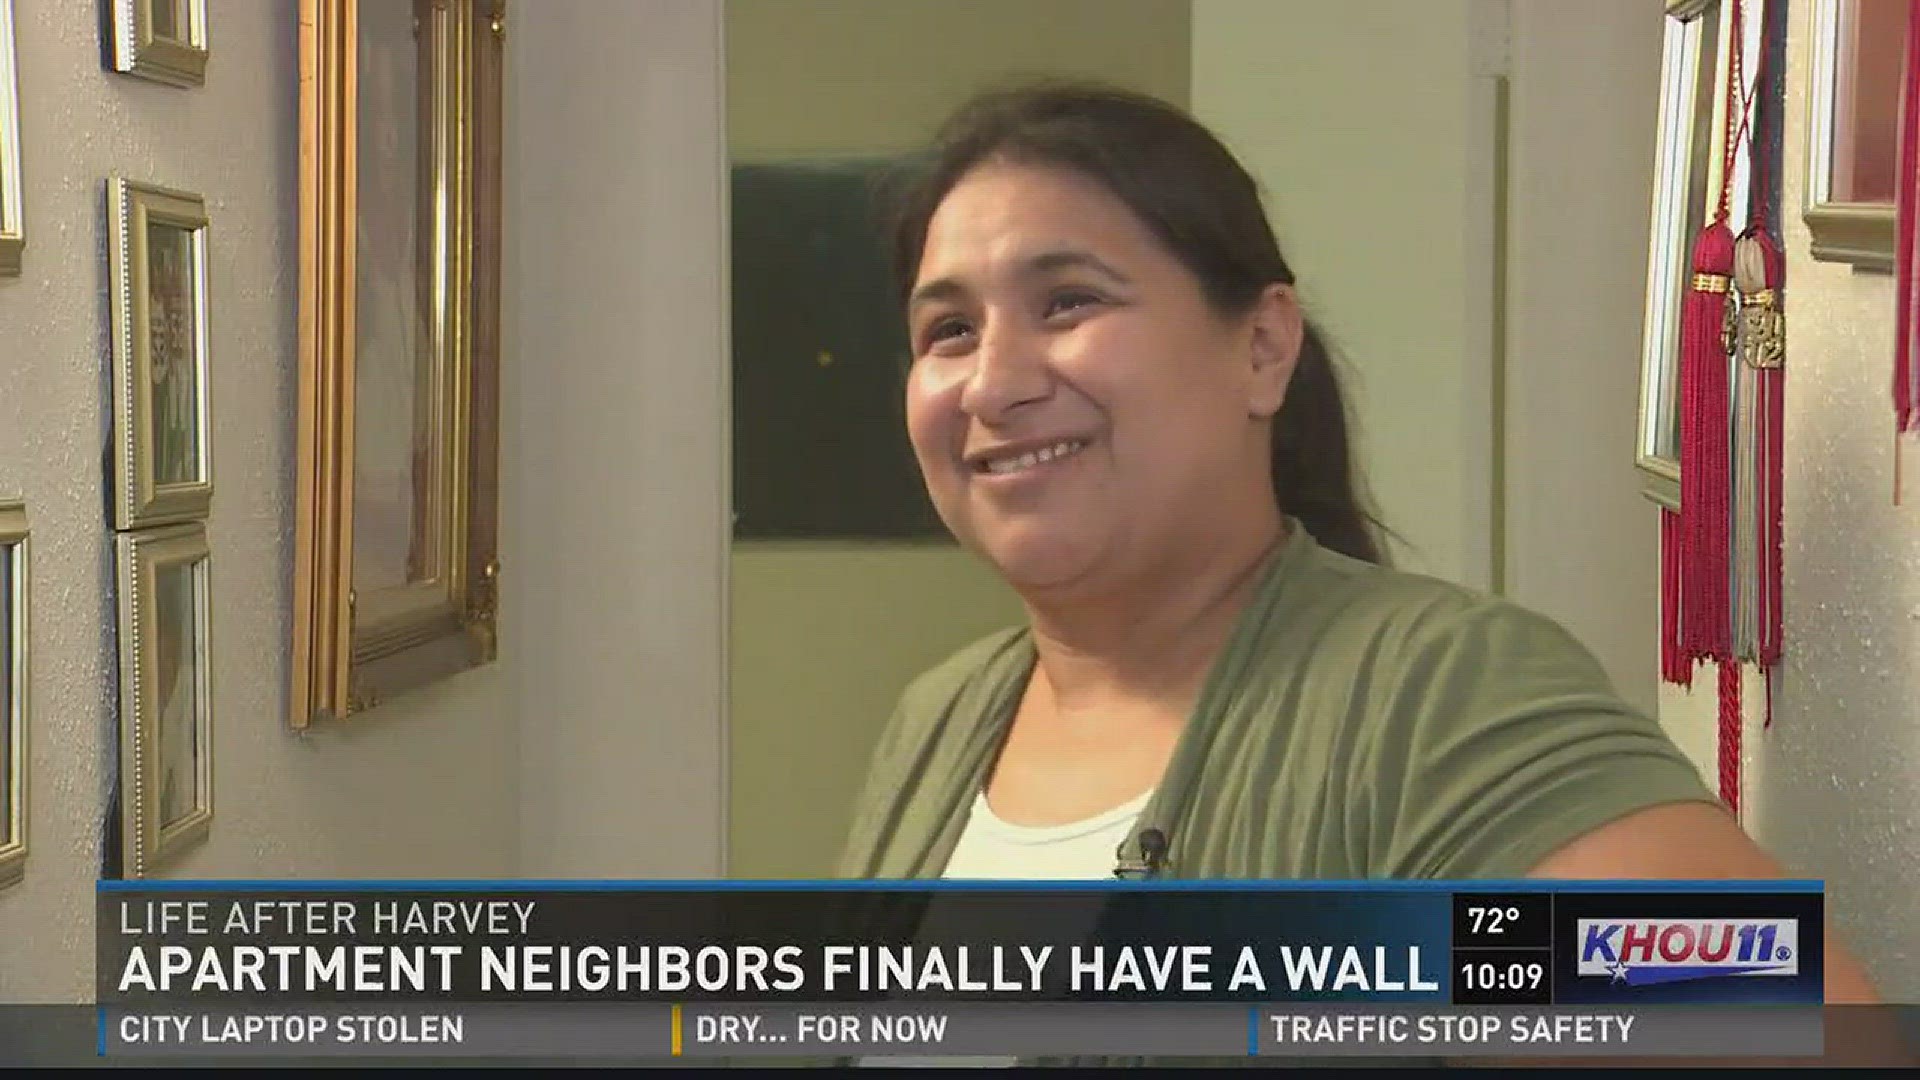 Hurricane Harvey flood victims left without walls between apartments for months finally have privacy. Their landlord delivered repairs after KHOU 11 News got involved.